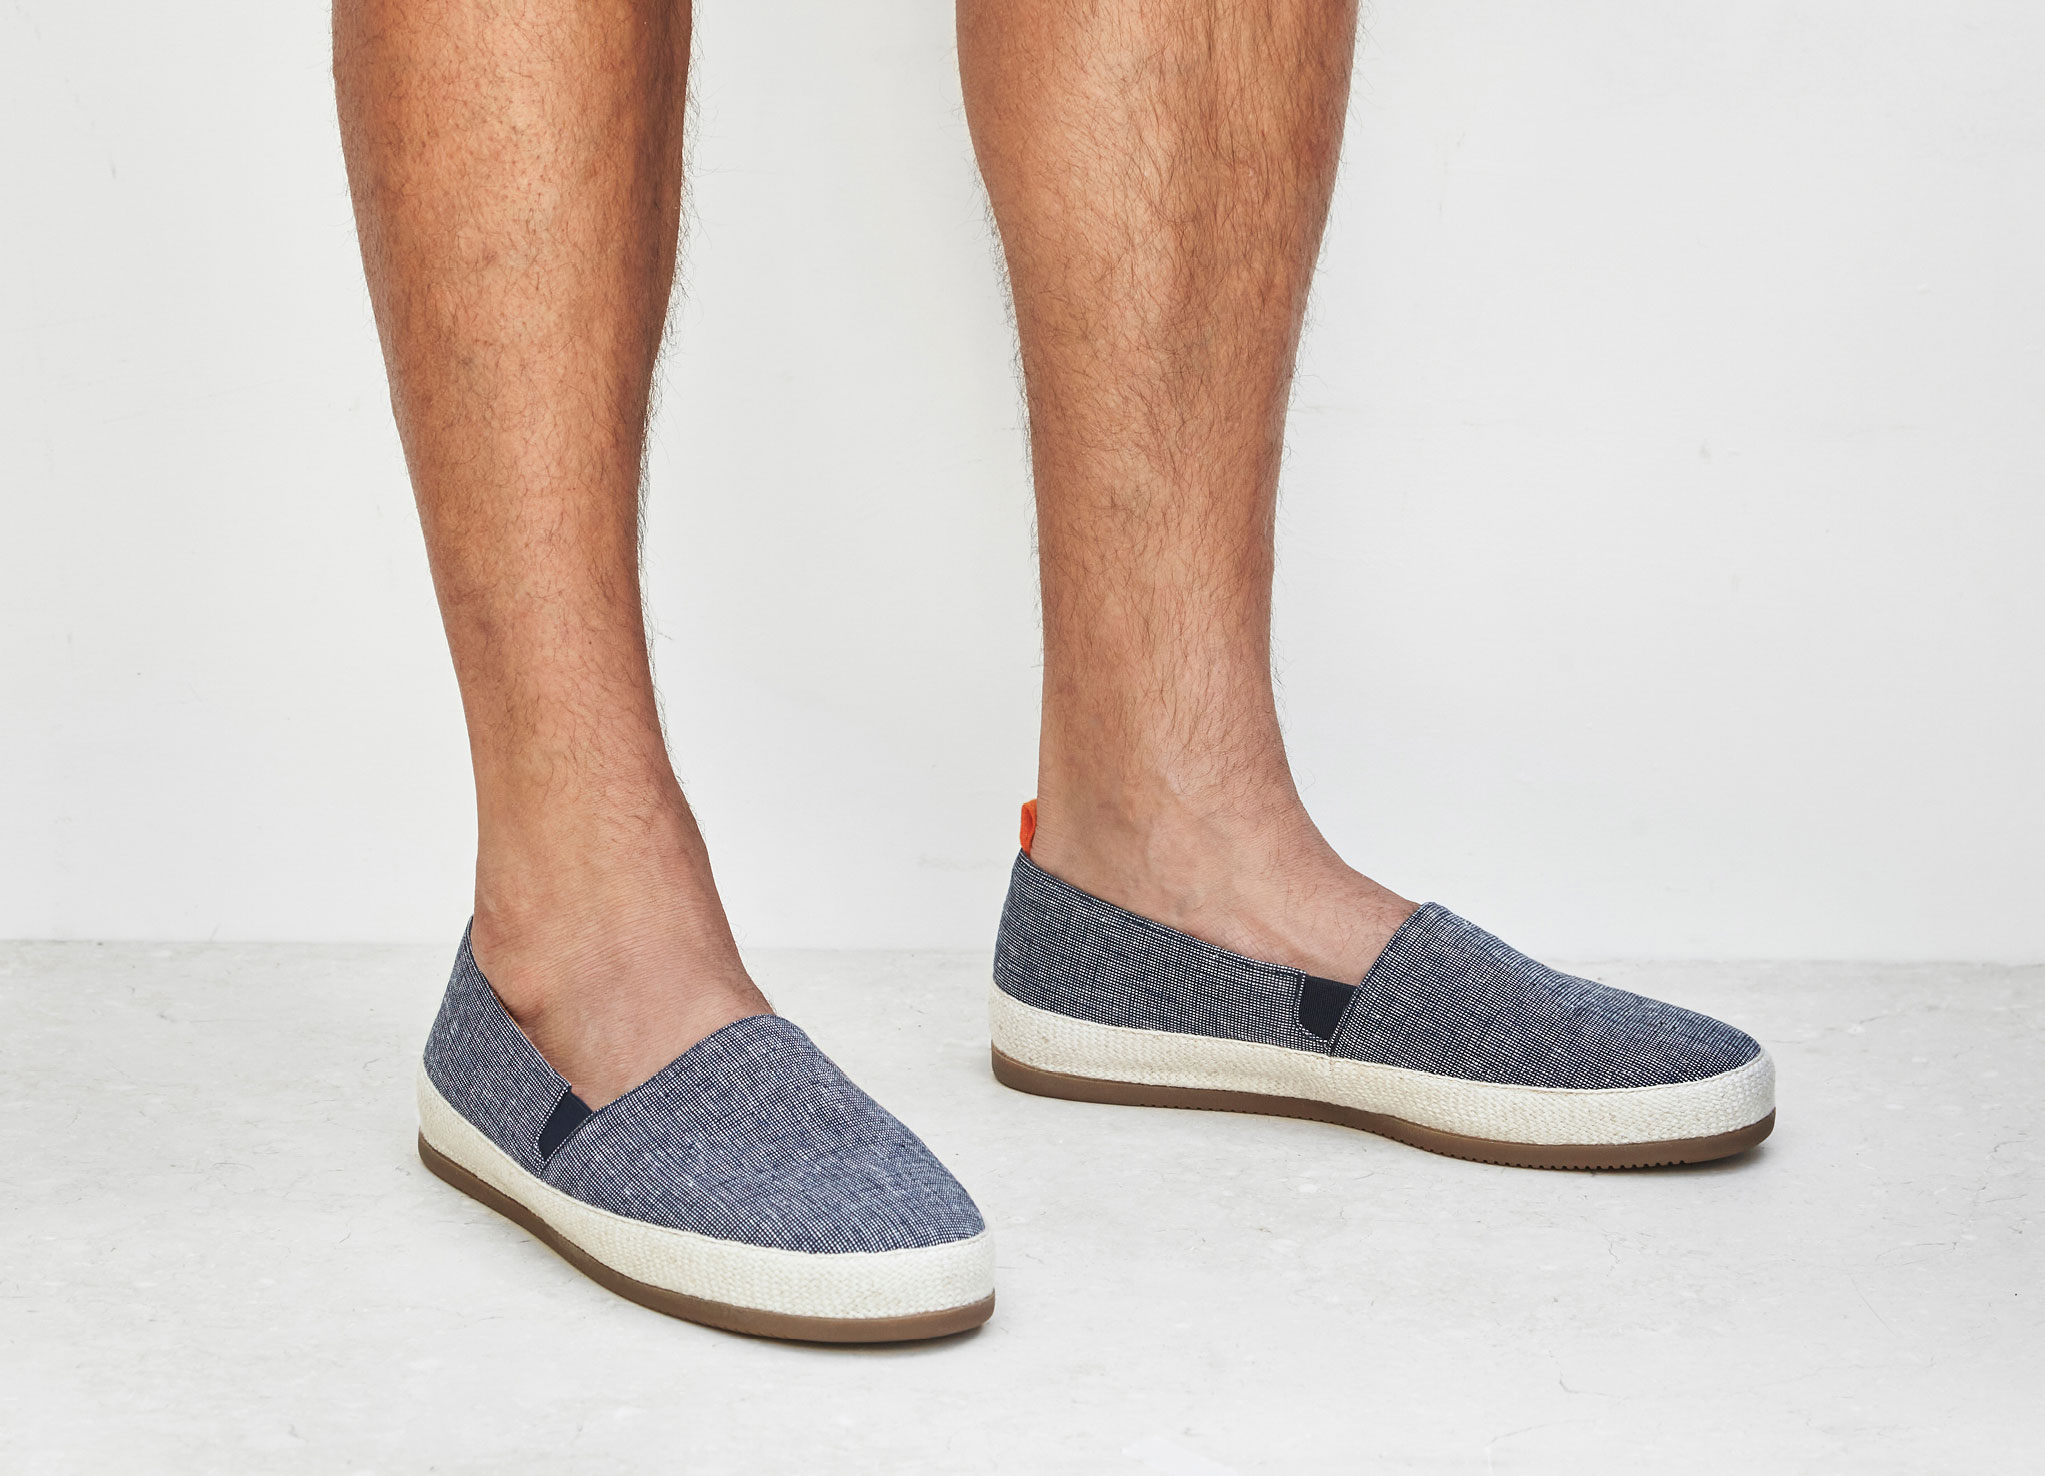 Blue for Men Doucals Leather Espadrilles in Slate Blue Mens Shoes Slip-on shoes Espadrille shoes and sandals 